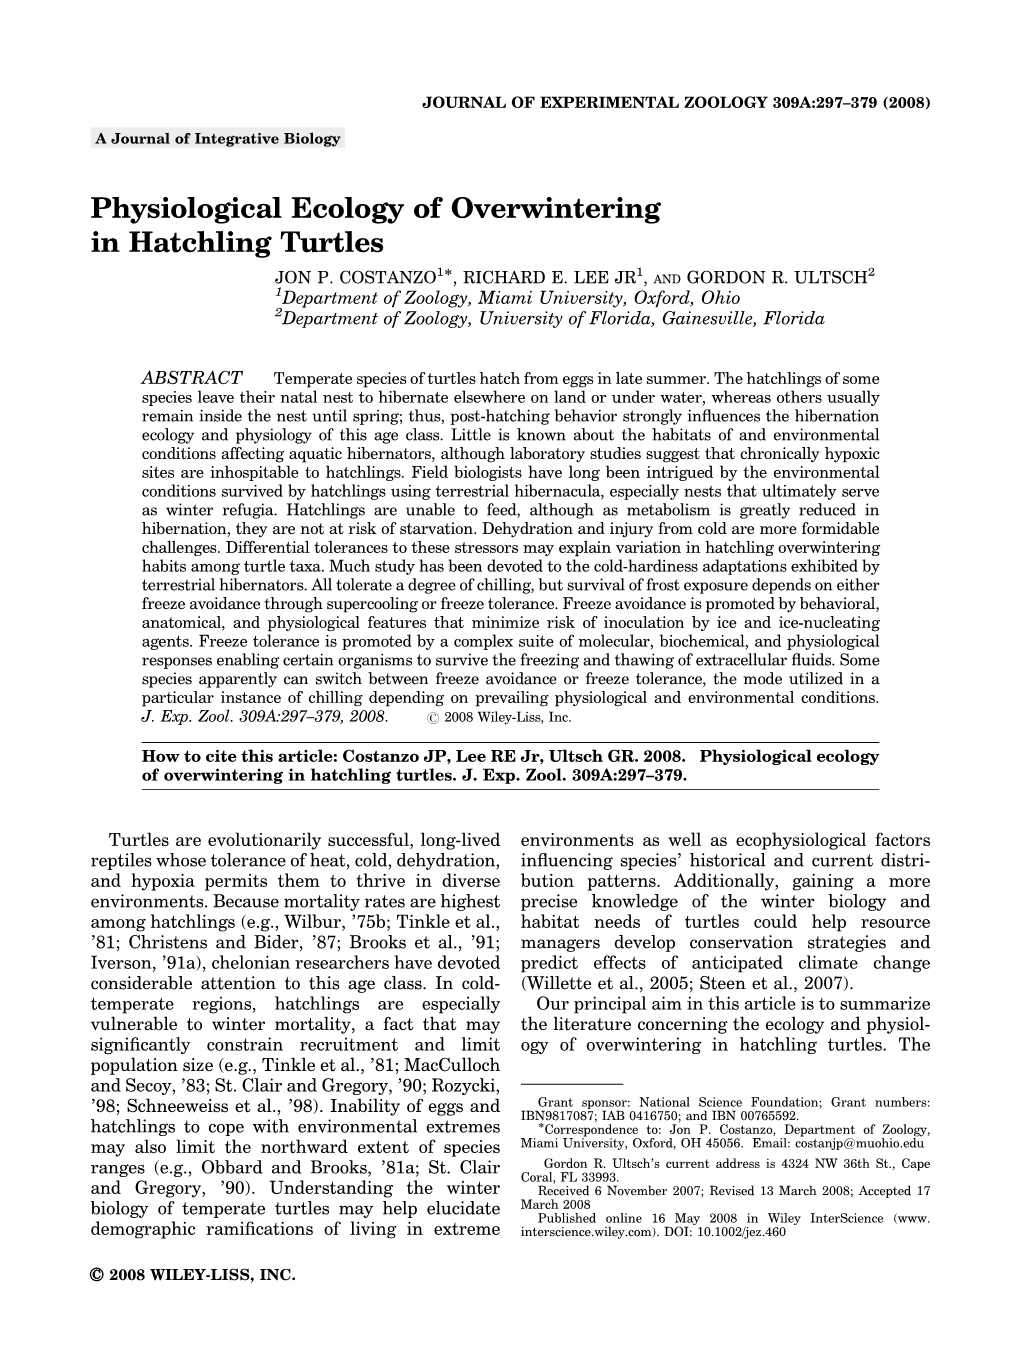 Physiological Ecology of Overwintering in Hatchling Turtles 1Ã 1 2 JON P